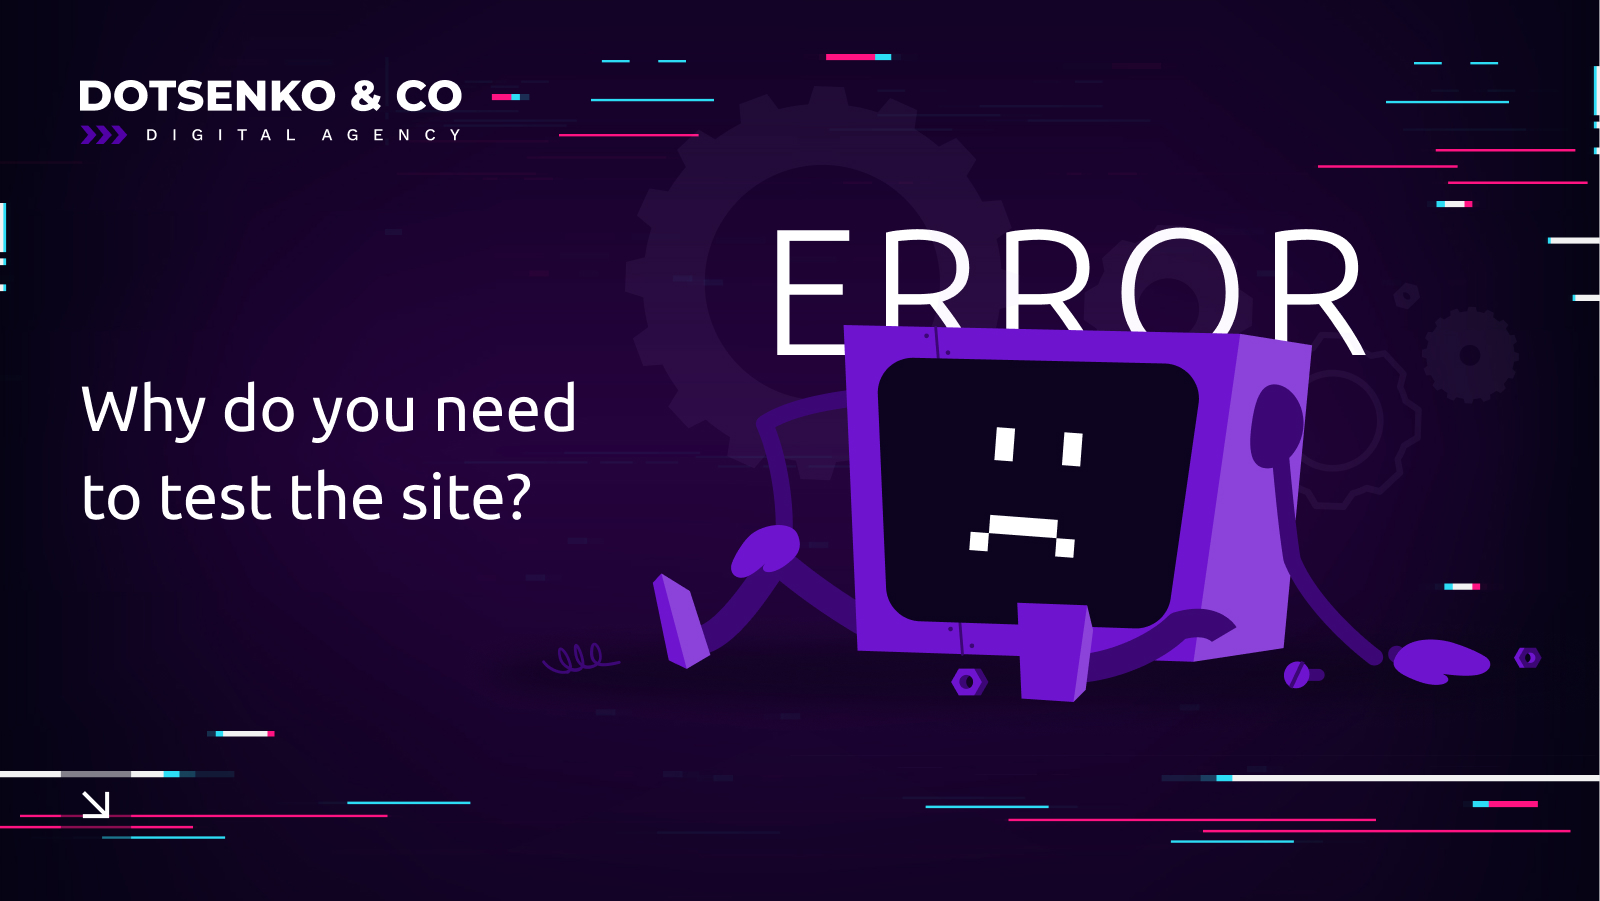 Why do you need to test the site?